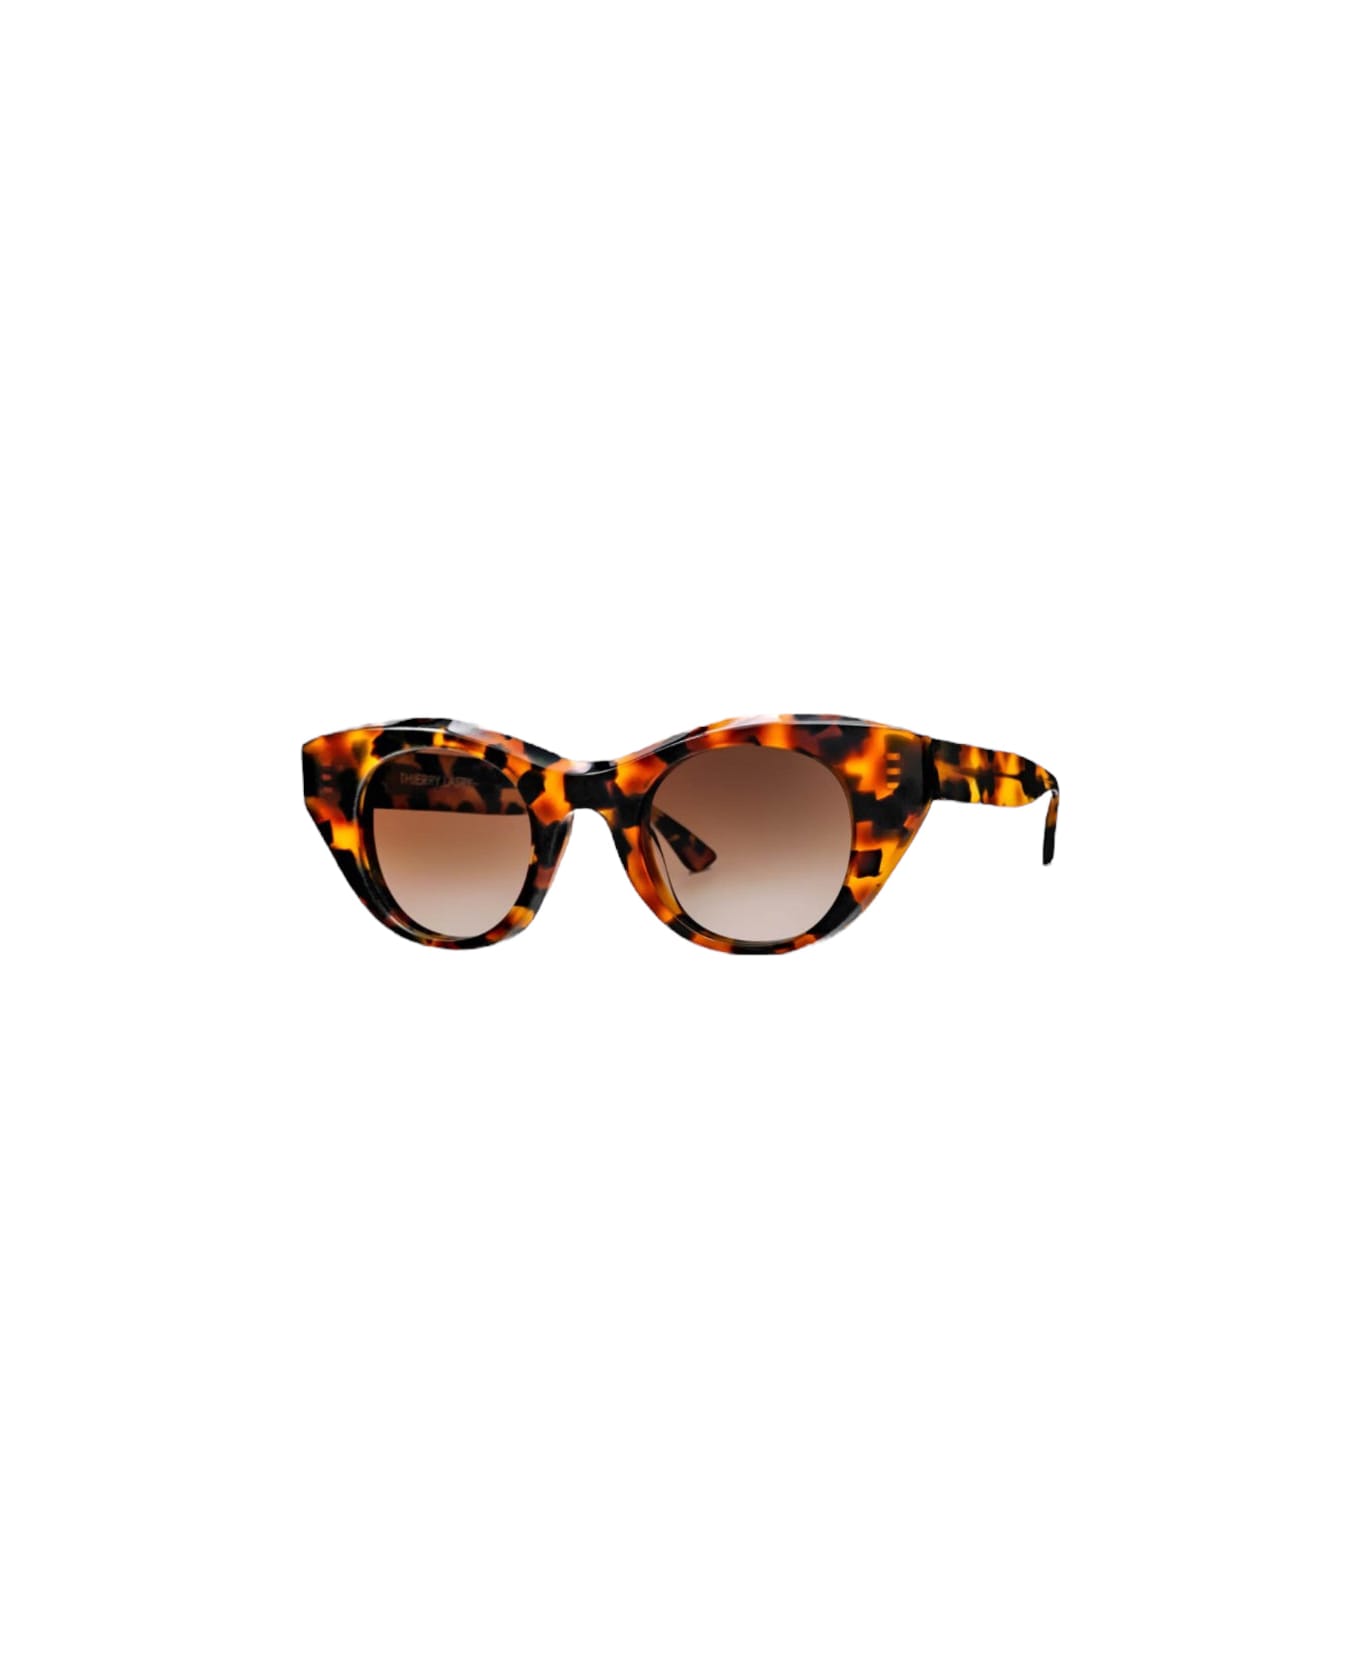 Thierry Lasry Snappy Sunglasses